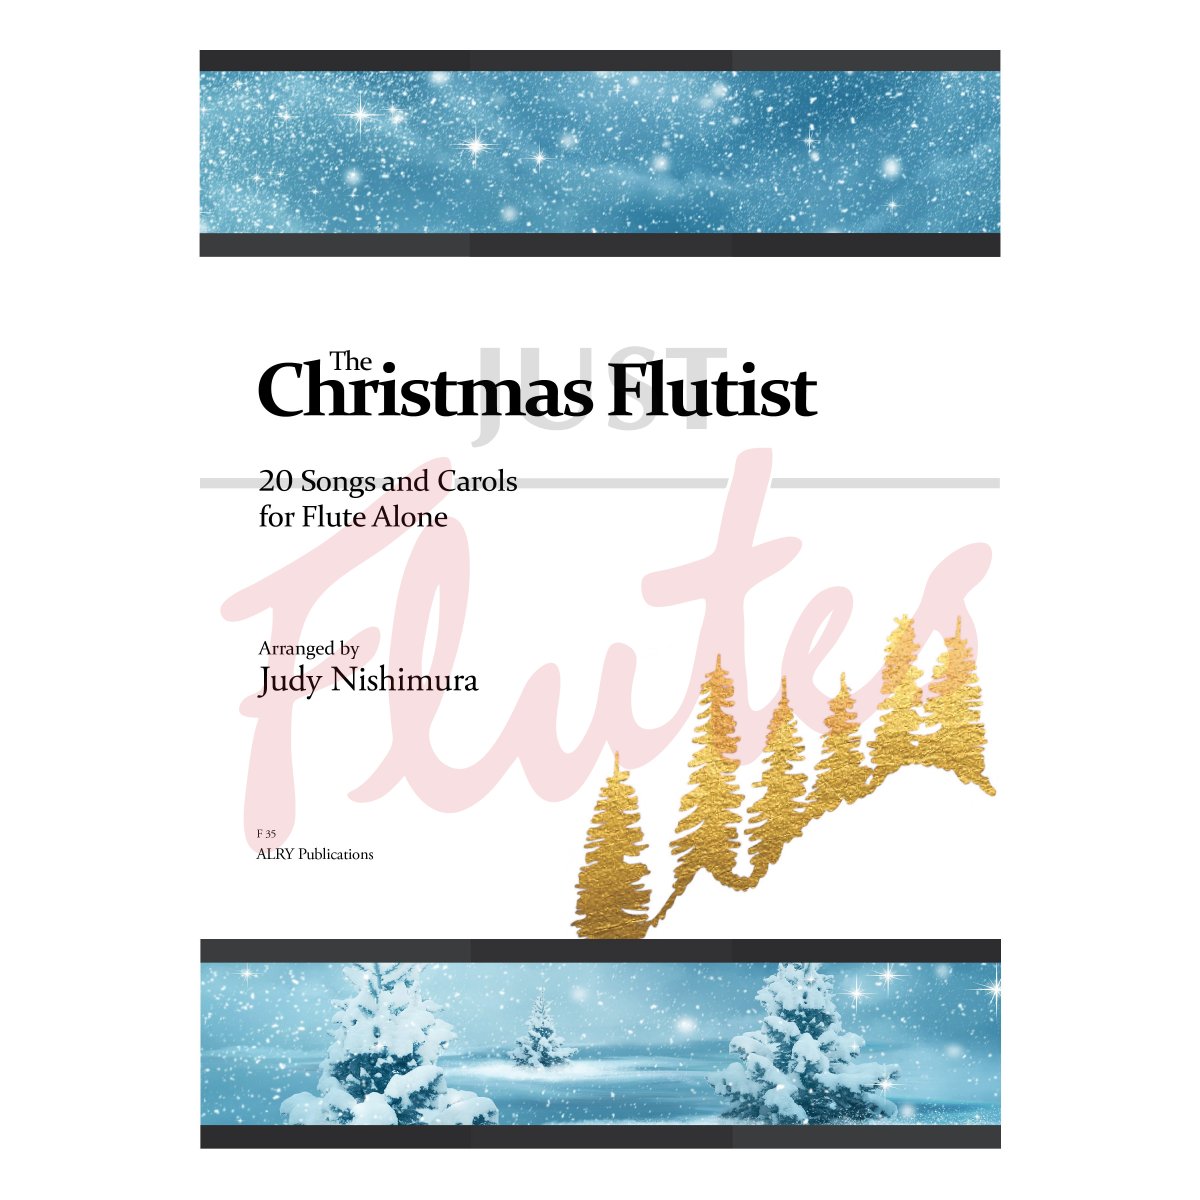 The Christmas Flutist: 20 Songs and Carols for Flute Alone